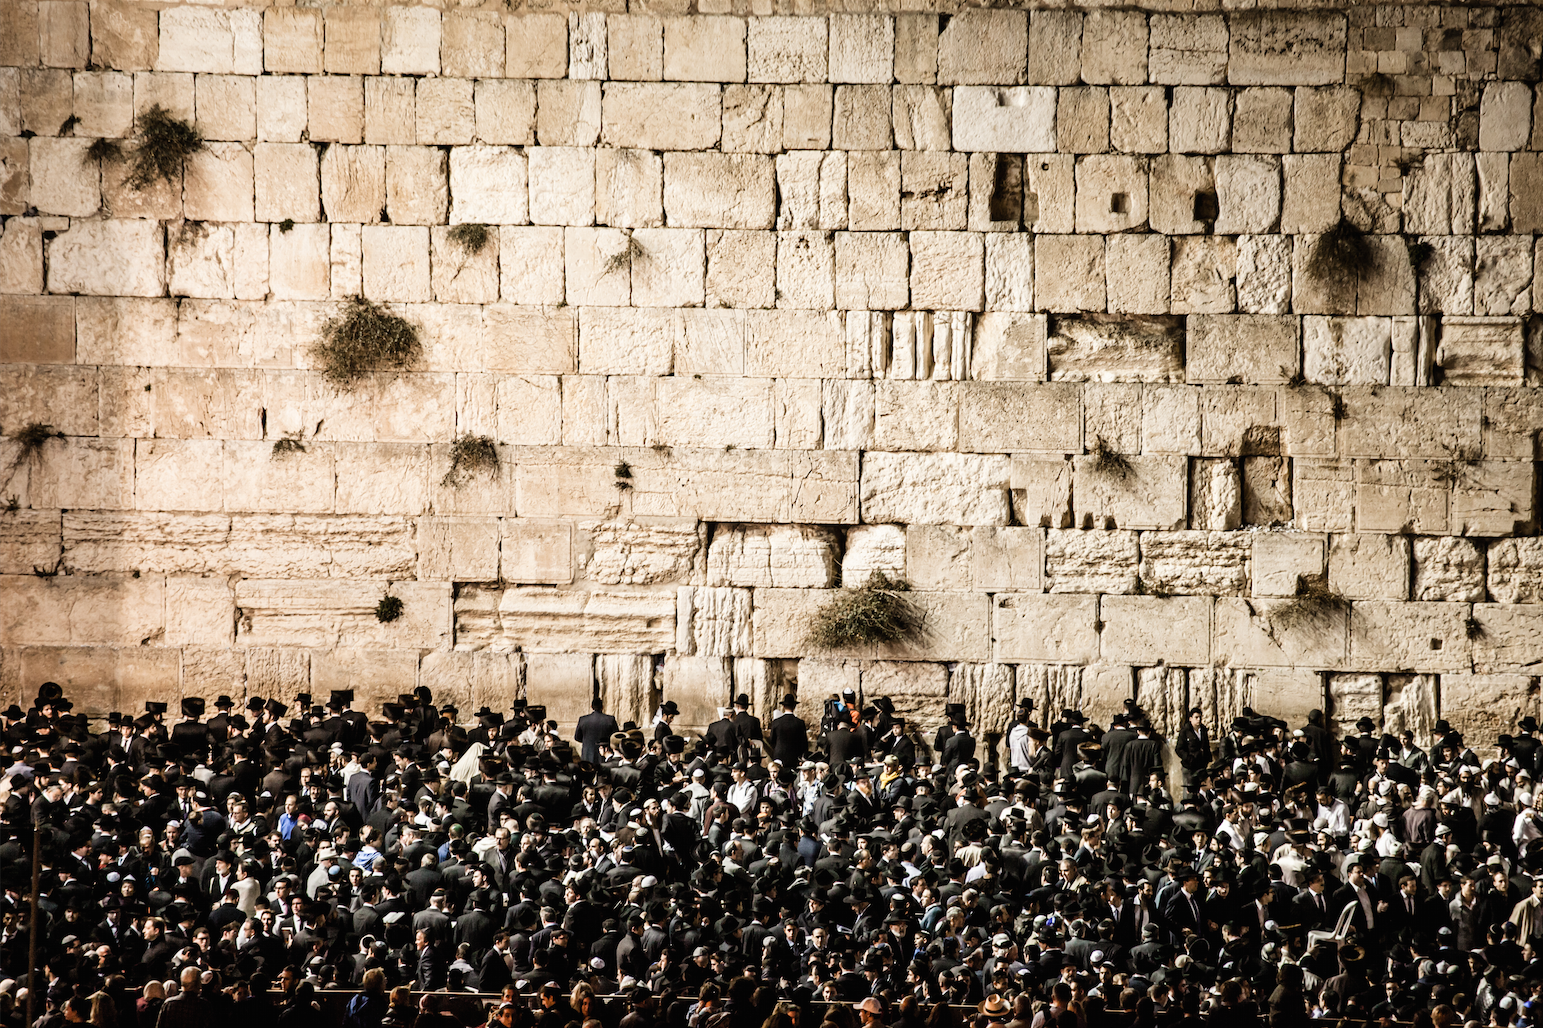 Jerusalem Conquered, destroyed, recaptured and rebuilt: the layers of Jerusalem’s history represent a plateau of monotheistic religions. Despite centuries of division and dispute between Christianity, Islam and Judaism, these religions are united by shared Abrahamic origins and by their mutual preoccupation with this holy city. This photo depicts prayers at the Western Wall Photo by Mariusz Prusaczyk